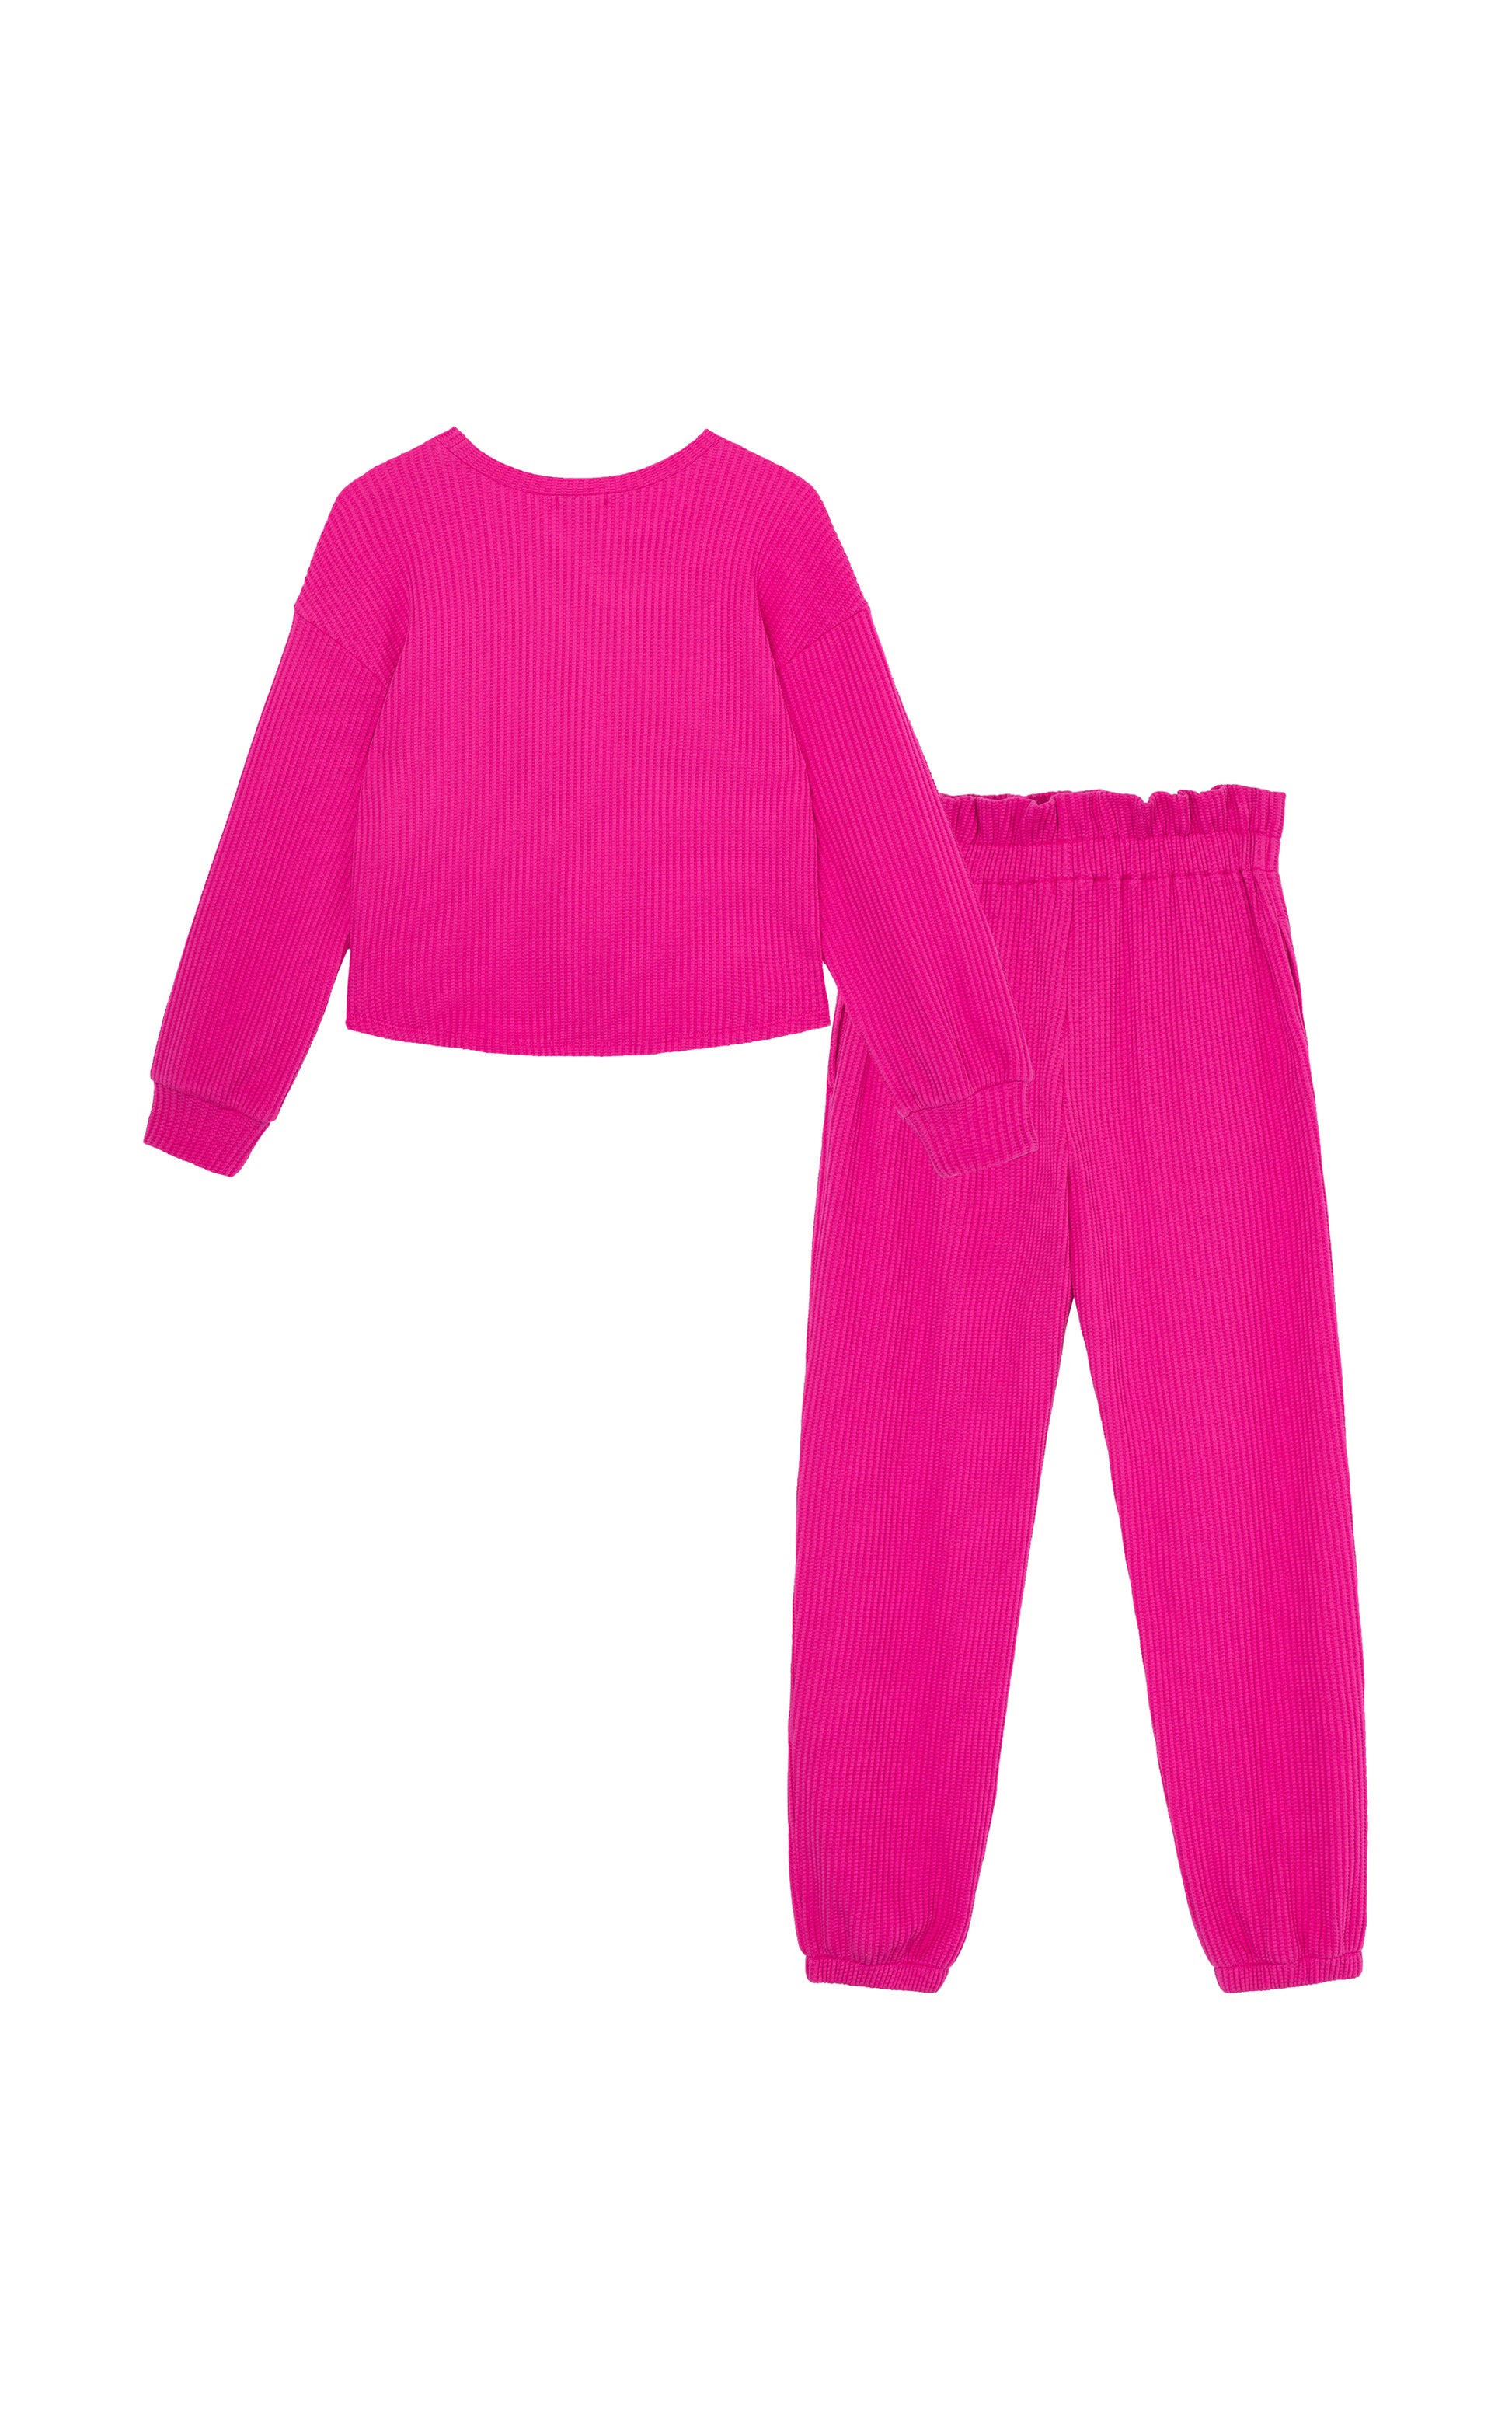 BACK OF MAGENTA WAFFLE KNIT SWEATER WITH KNOT TWIST IN FRONT AND MATCHING SWEATPANTS